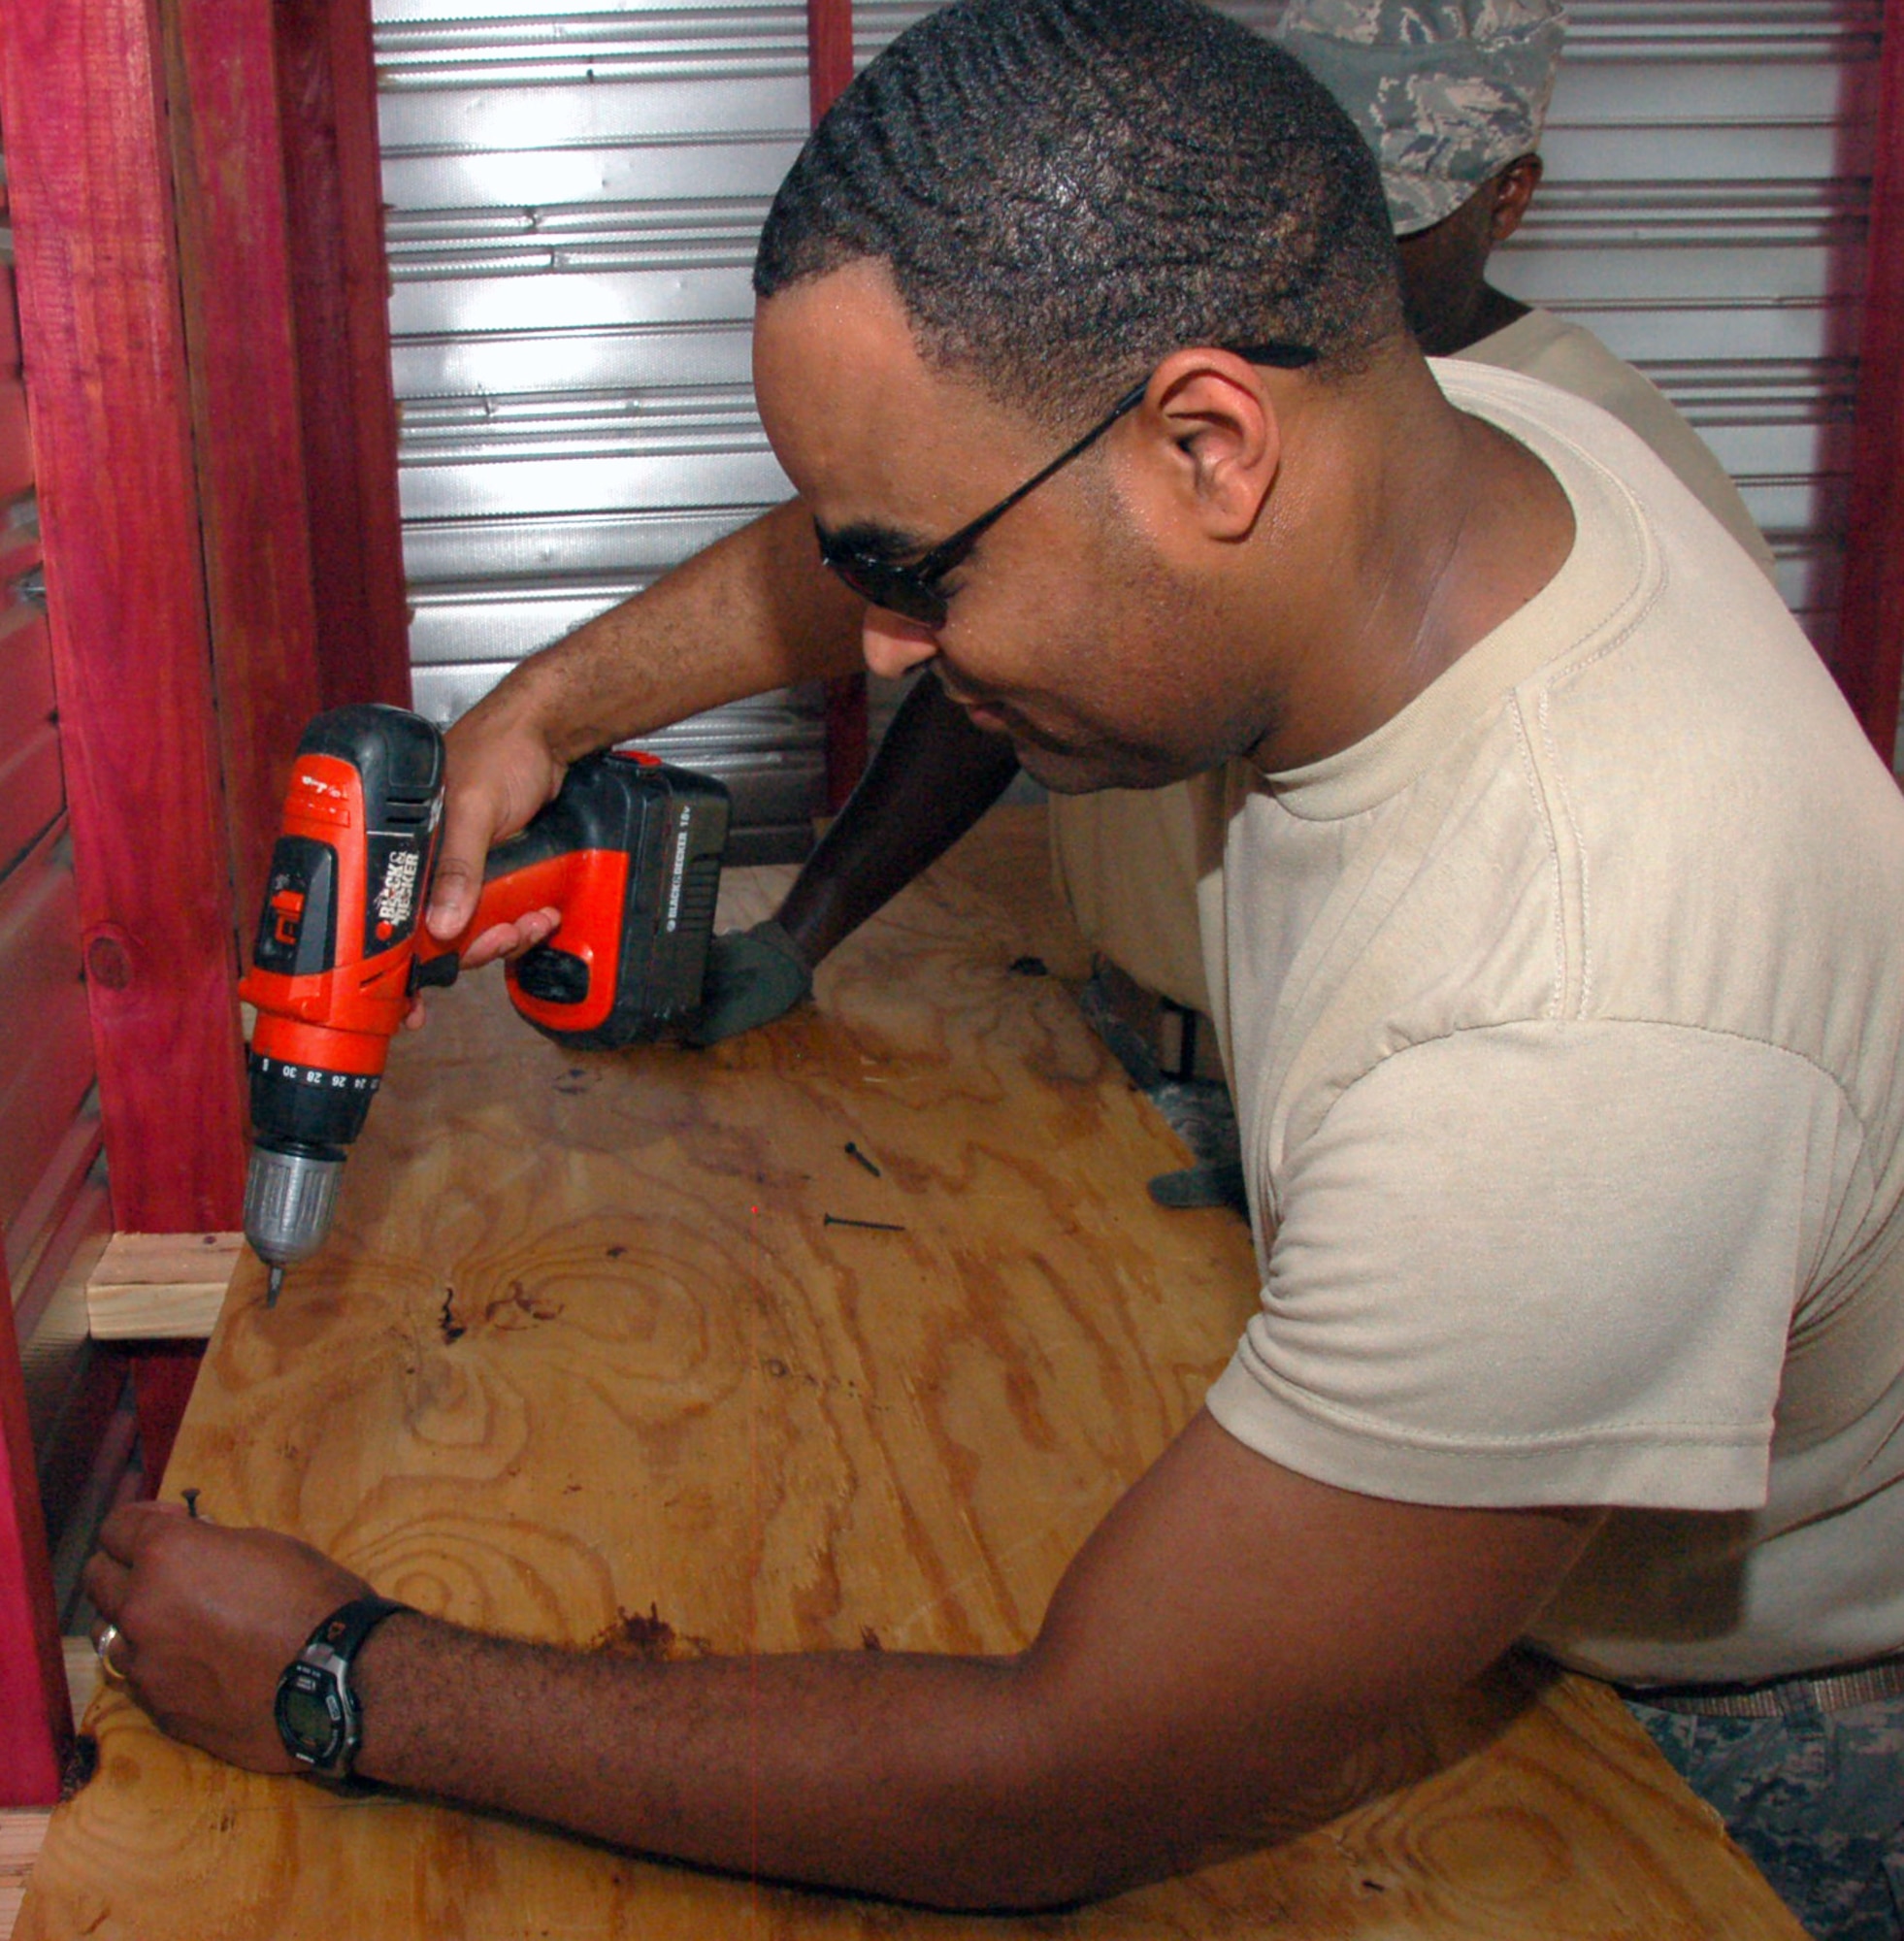 SHREVEPORT, La. – Chief Master Sgt. Keith Bailey, Headquarters Eighth Air Force, secures a plywood shelf in the Providence House daycare storage area.  Fourteen members of the Headquarters Eighth Air Force staff and 608th Air Operations Center volunteered their time to help the Providence House in downtown Shreveport, La., July 20. The members were built new shelves for the daycare and moved furniture in the warehouse. The Providence House is a residential development center for homeless families with children, providing comprehensive support services for improving the family structure and moving the family into independent living. (U.S. Air Force photo by Staff Sgt. Brian Stives)